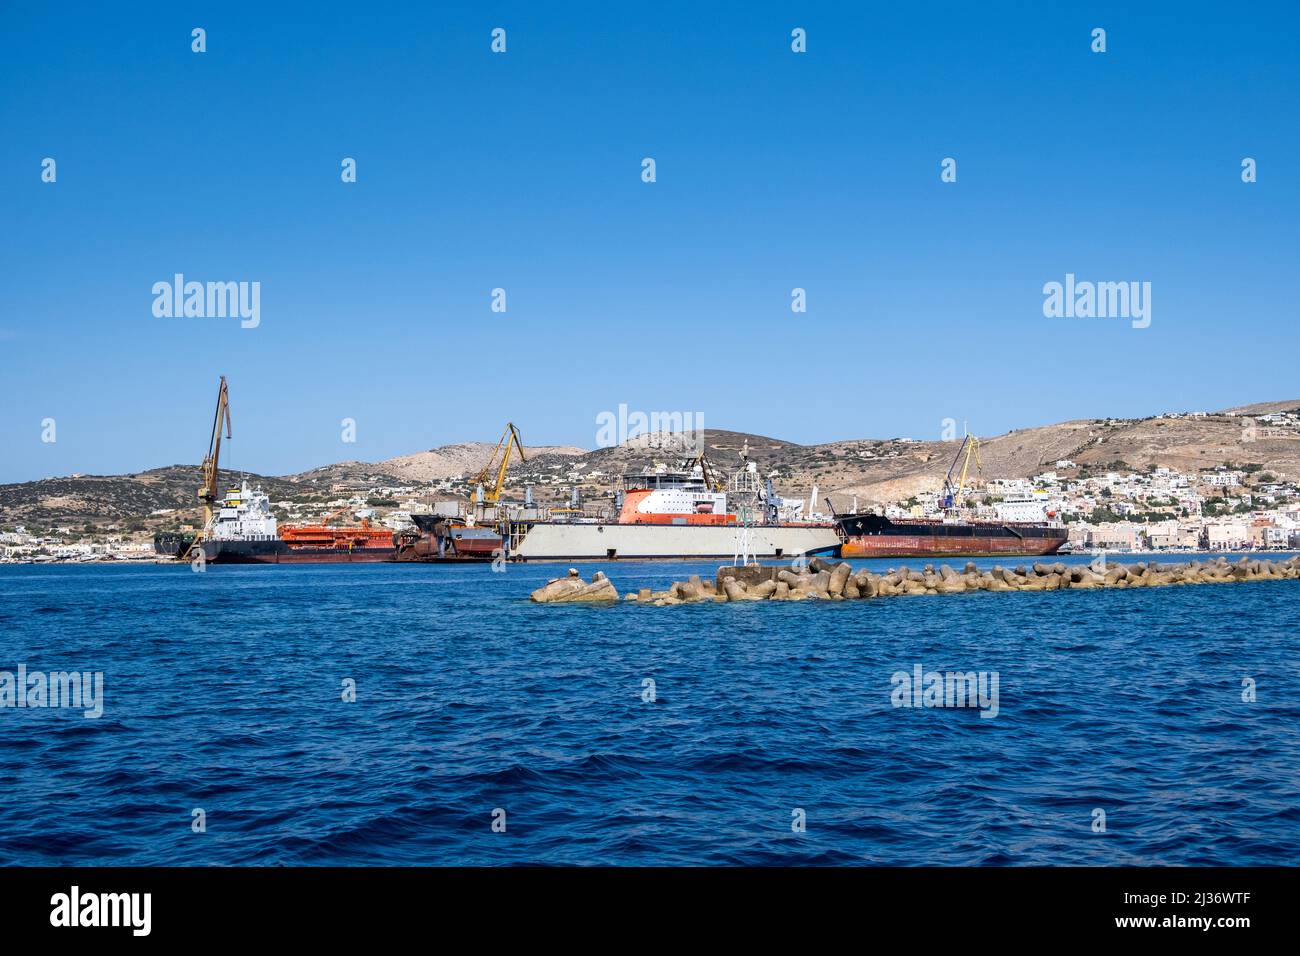 Neorion shipyard harbour and industrial plant at Ermoupolis Syros island, Cyclades, Greece. Ship, crane, international trade, shipping, container, car Stock Photo